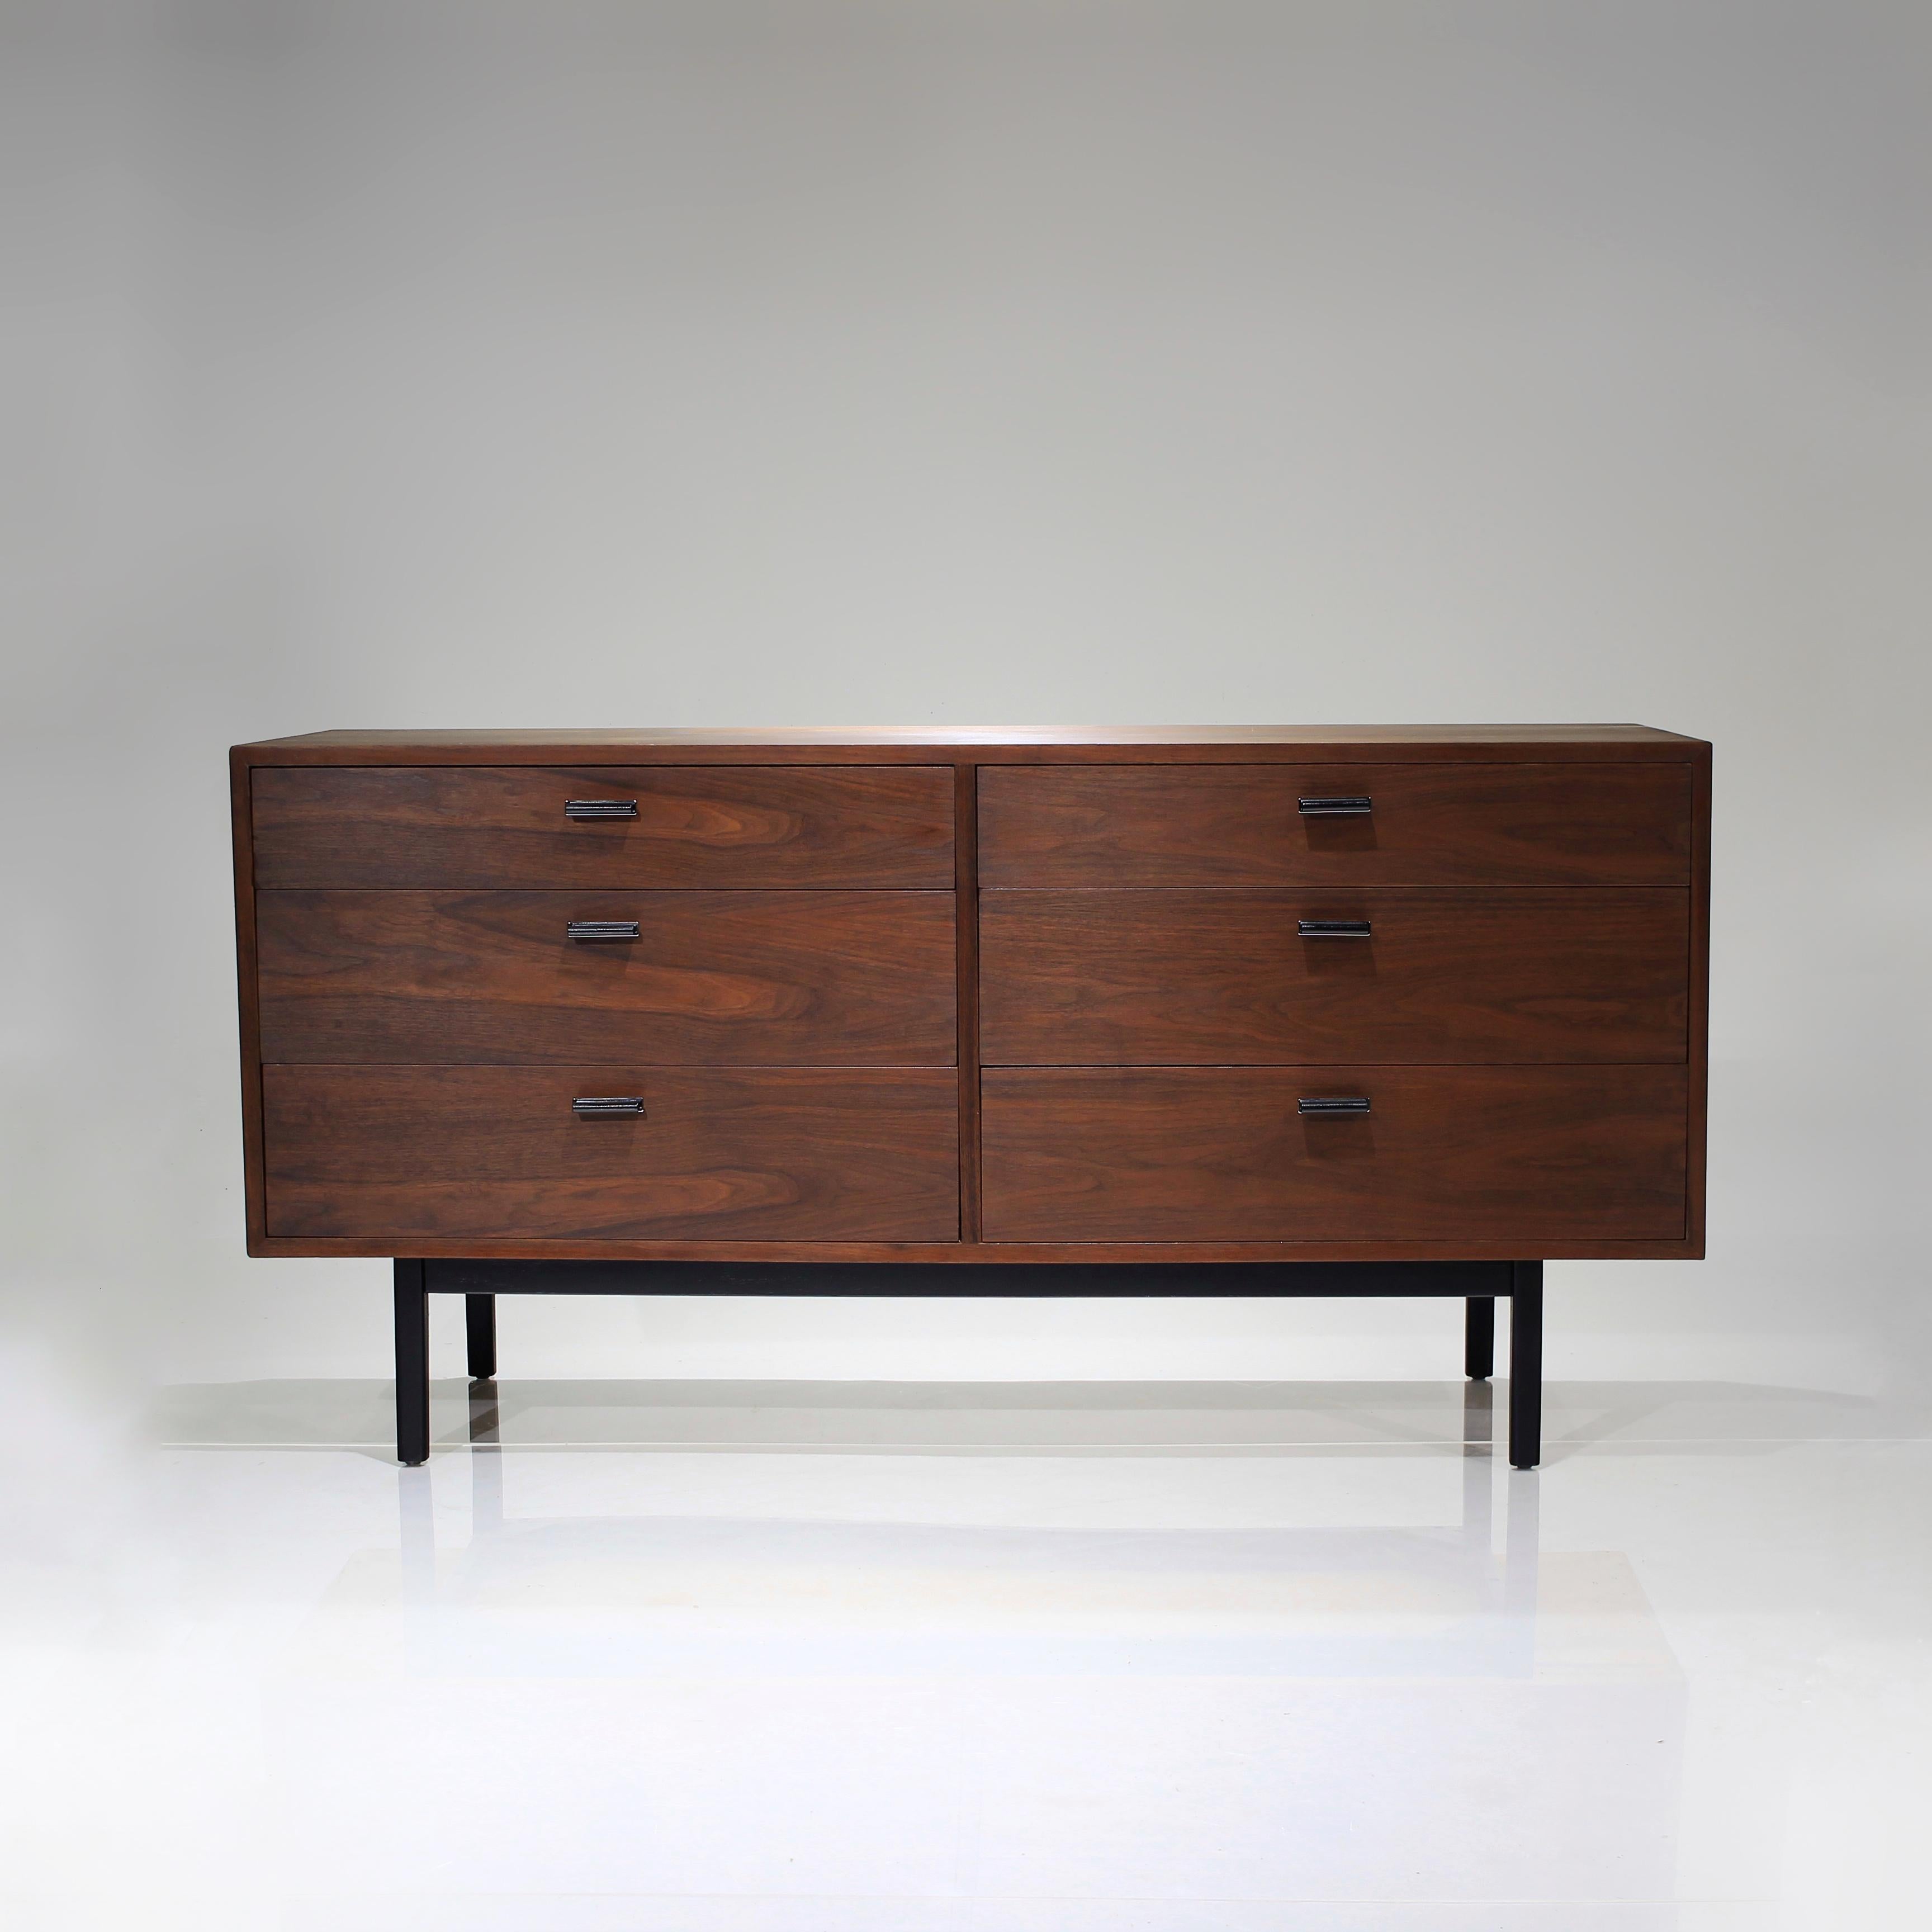 Presenting this gorgeous 6 drawer Walnut Dresser by Jack Cartwright for Founders.

Absolutely clean lines, accentuated steel black pulls with chromed plate backing. Elevated by the matching black base, tying it all together beautifully.

Ample